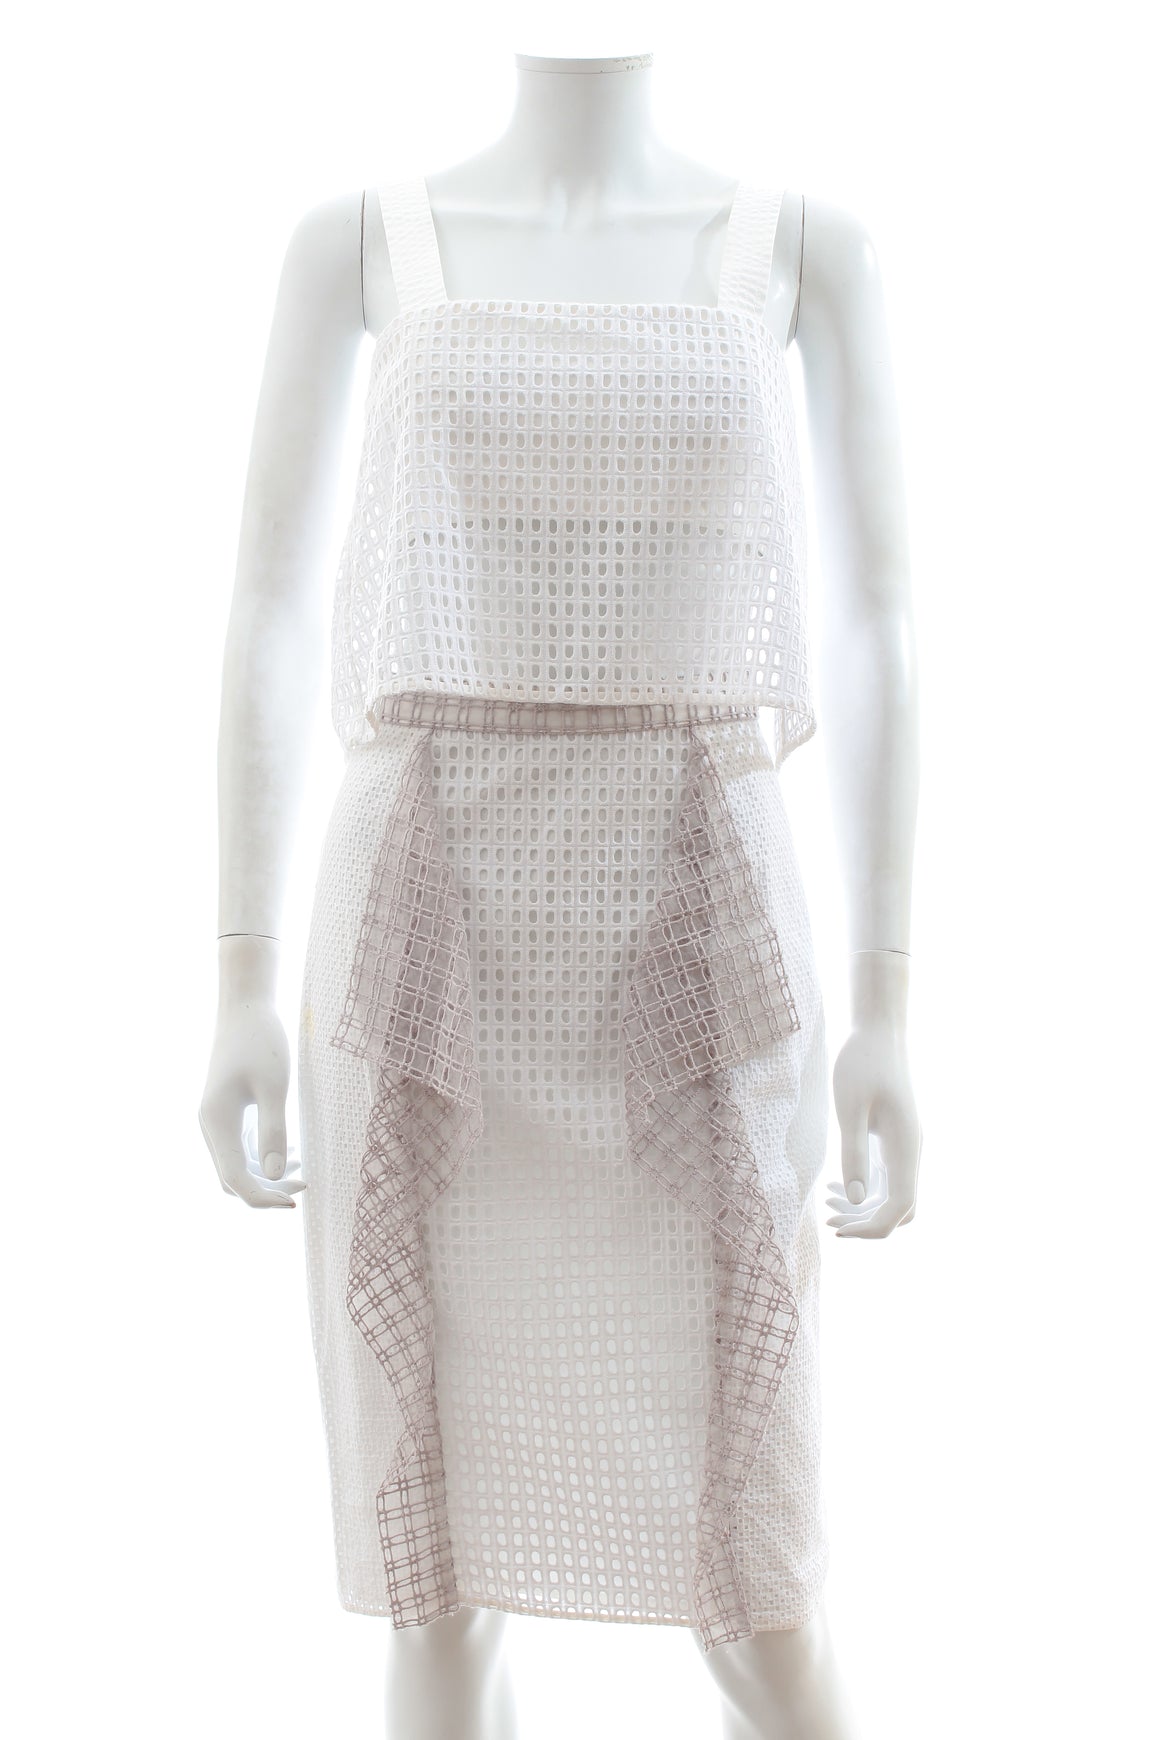 3.1 Phillip Lim Broderie Anglaise Cotton Top and Skirt